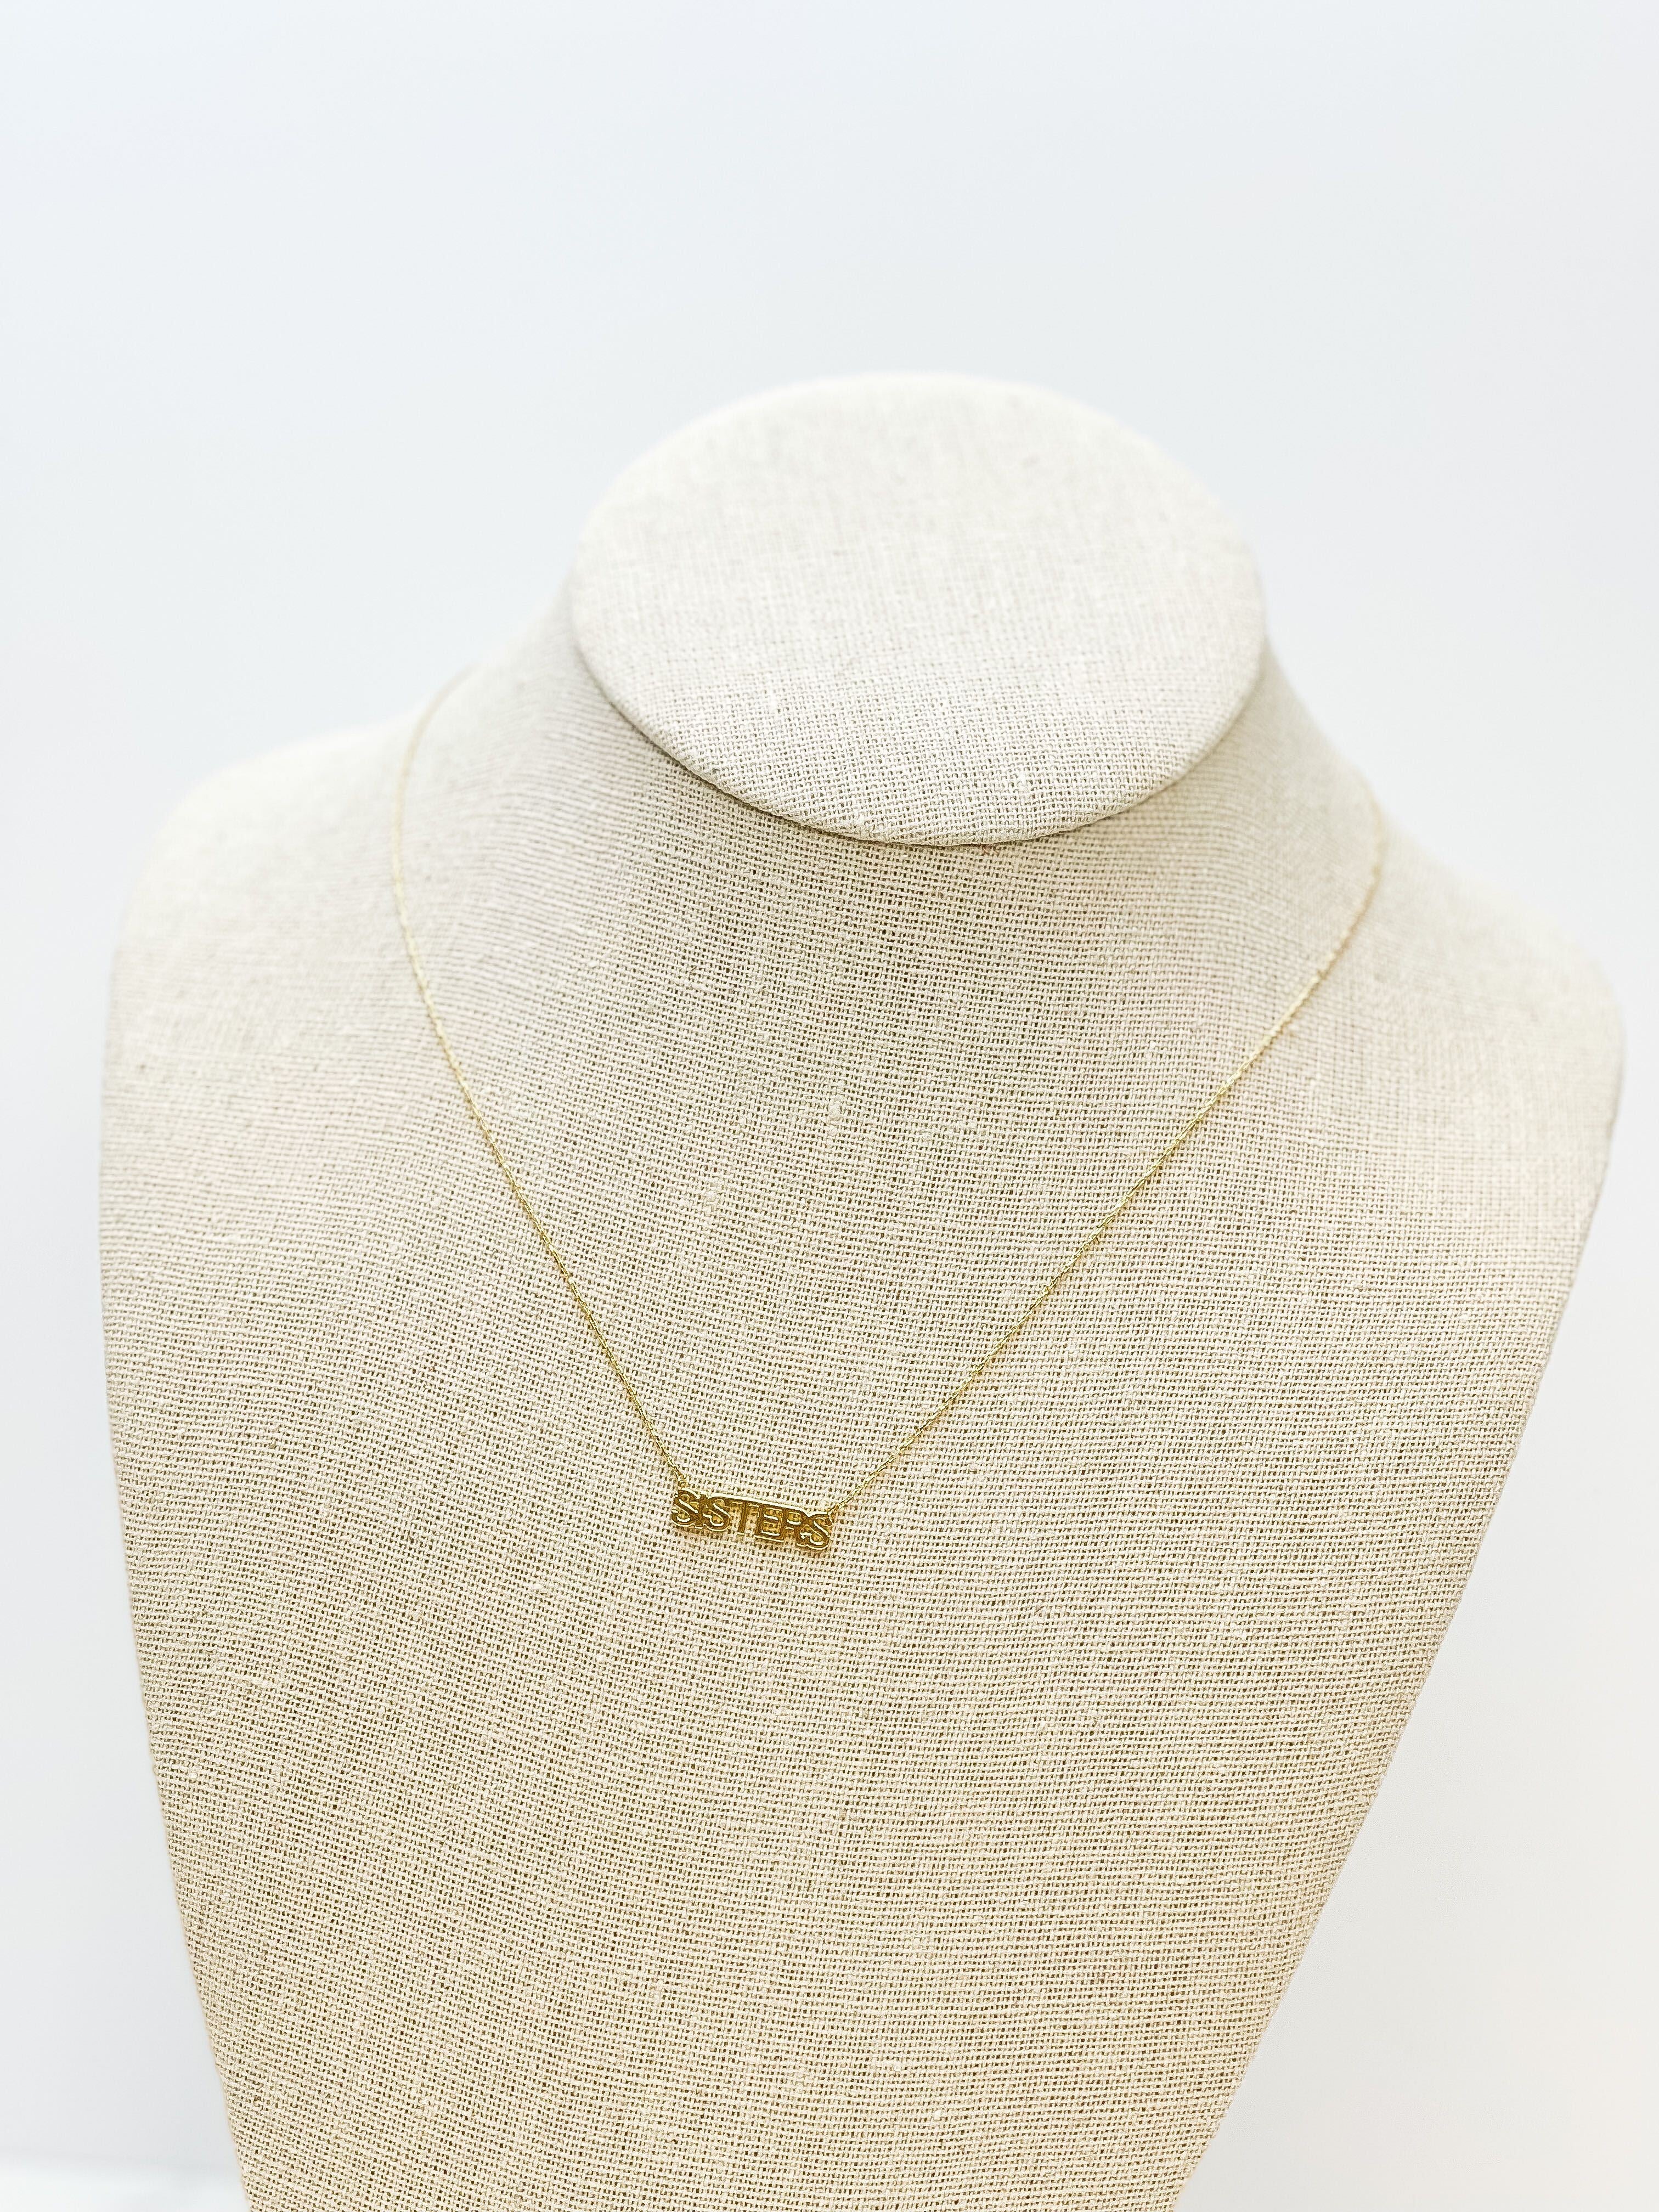 'Sisters' Gold Pendant Necklace